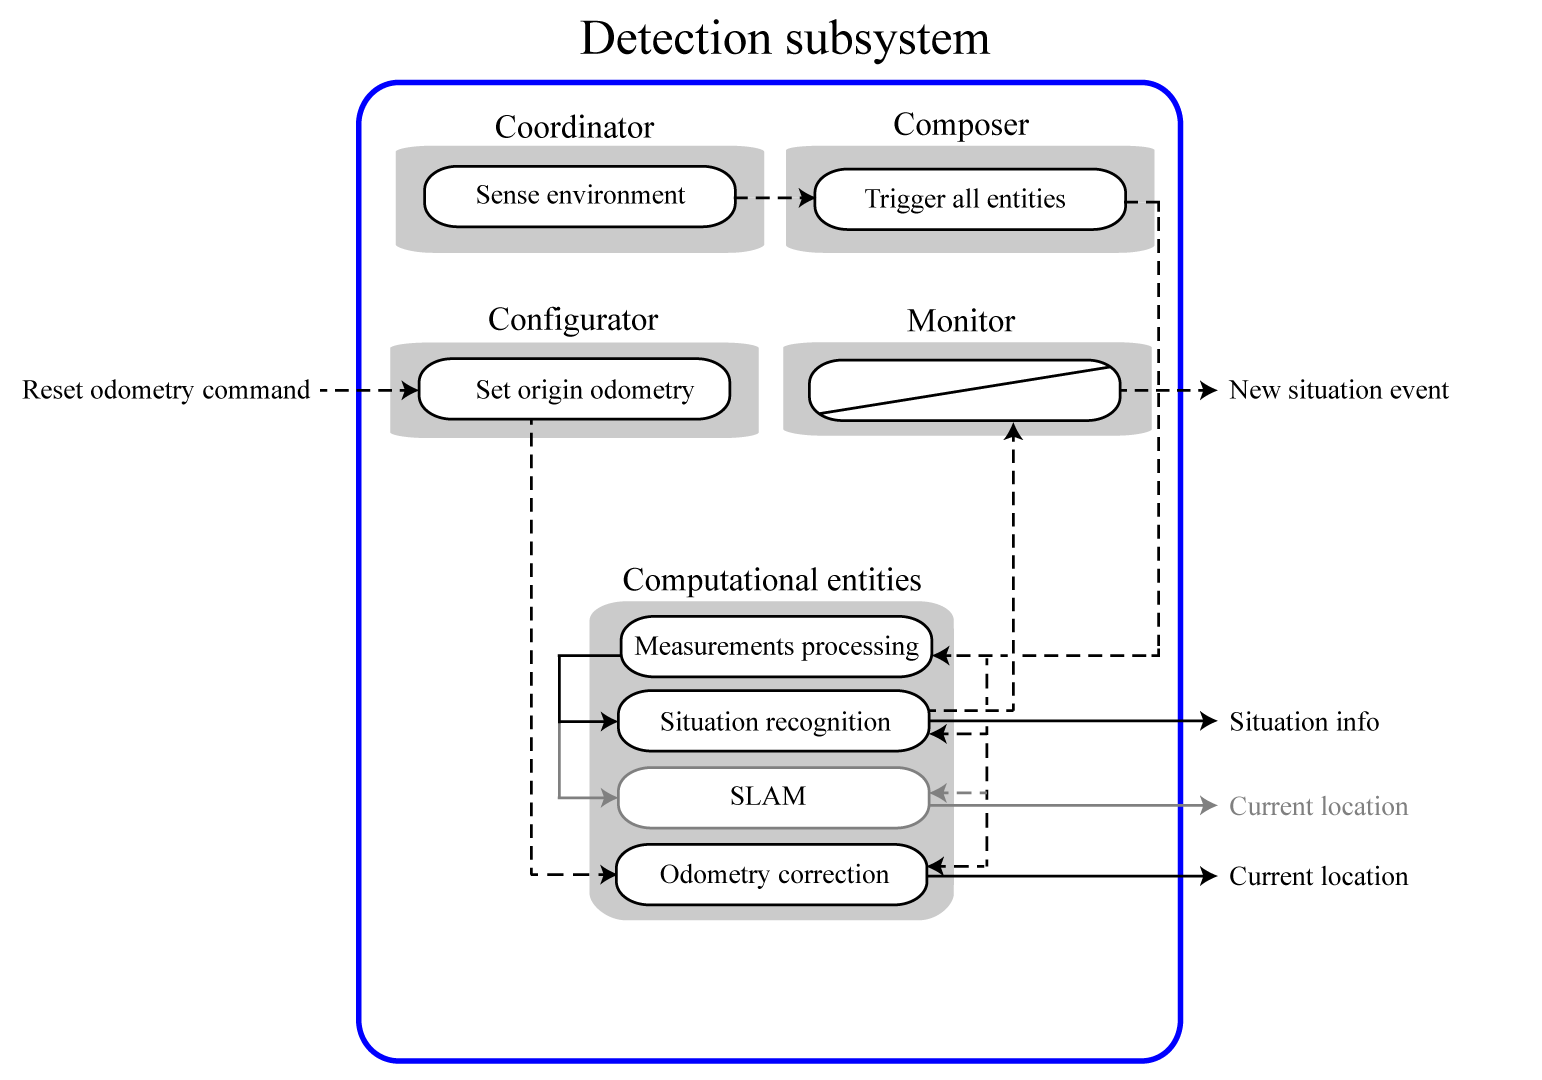 The detection subsystem